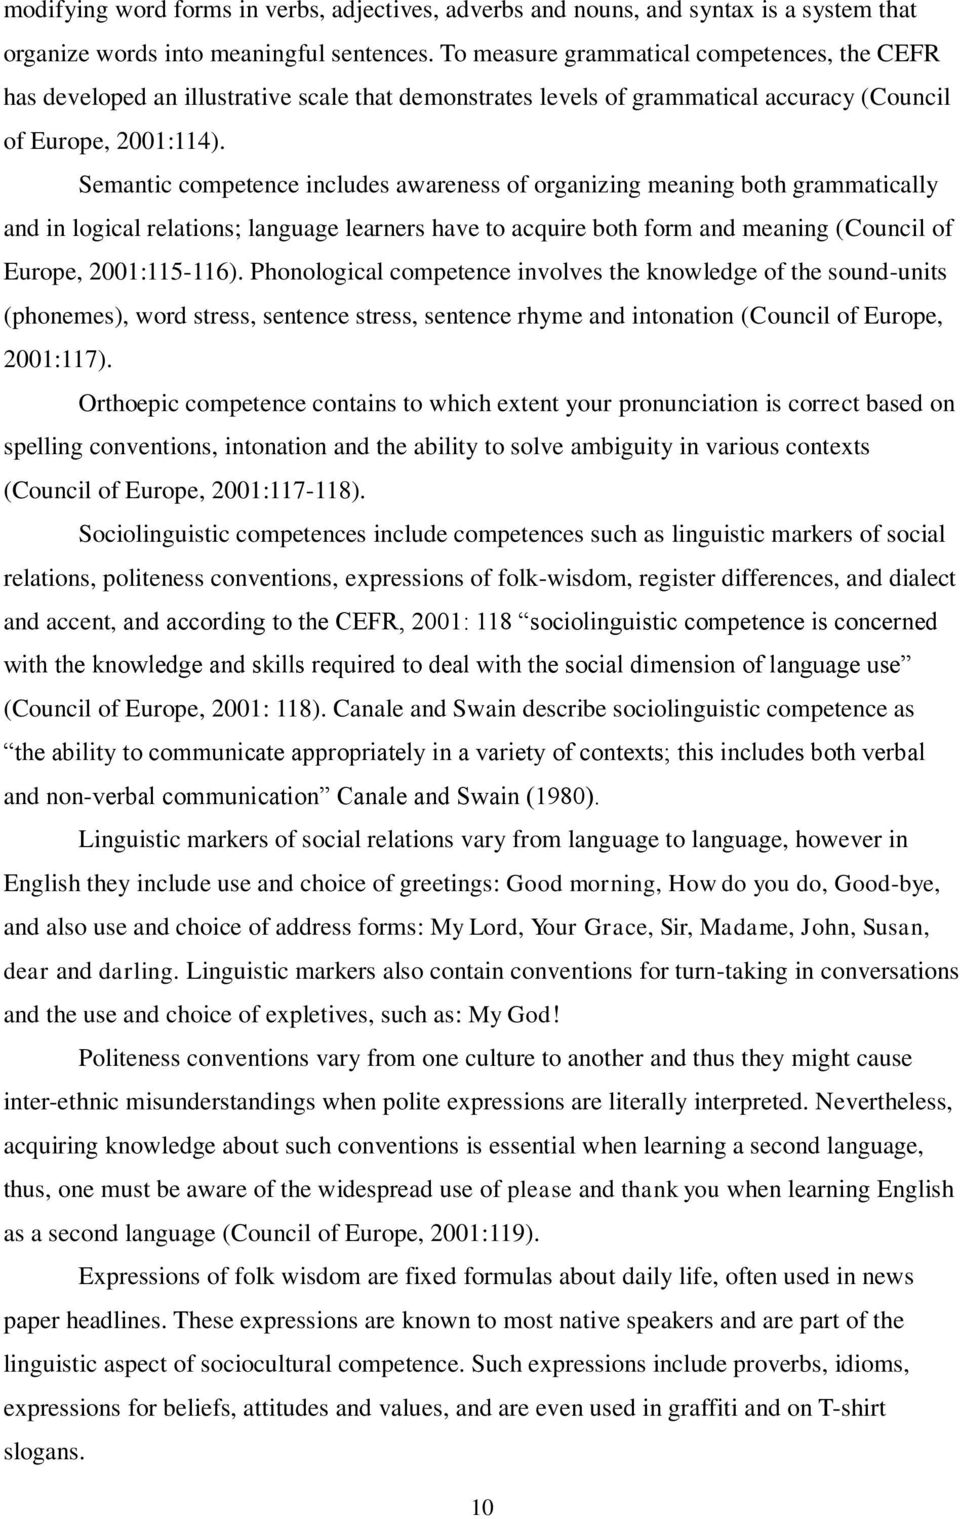 Semantic competence includes awareness of organizing meaning both grammatically and in logical relations; language learners have to acquire both form and meaning (Council of Europe, 2001:115-116).